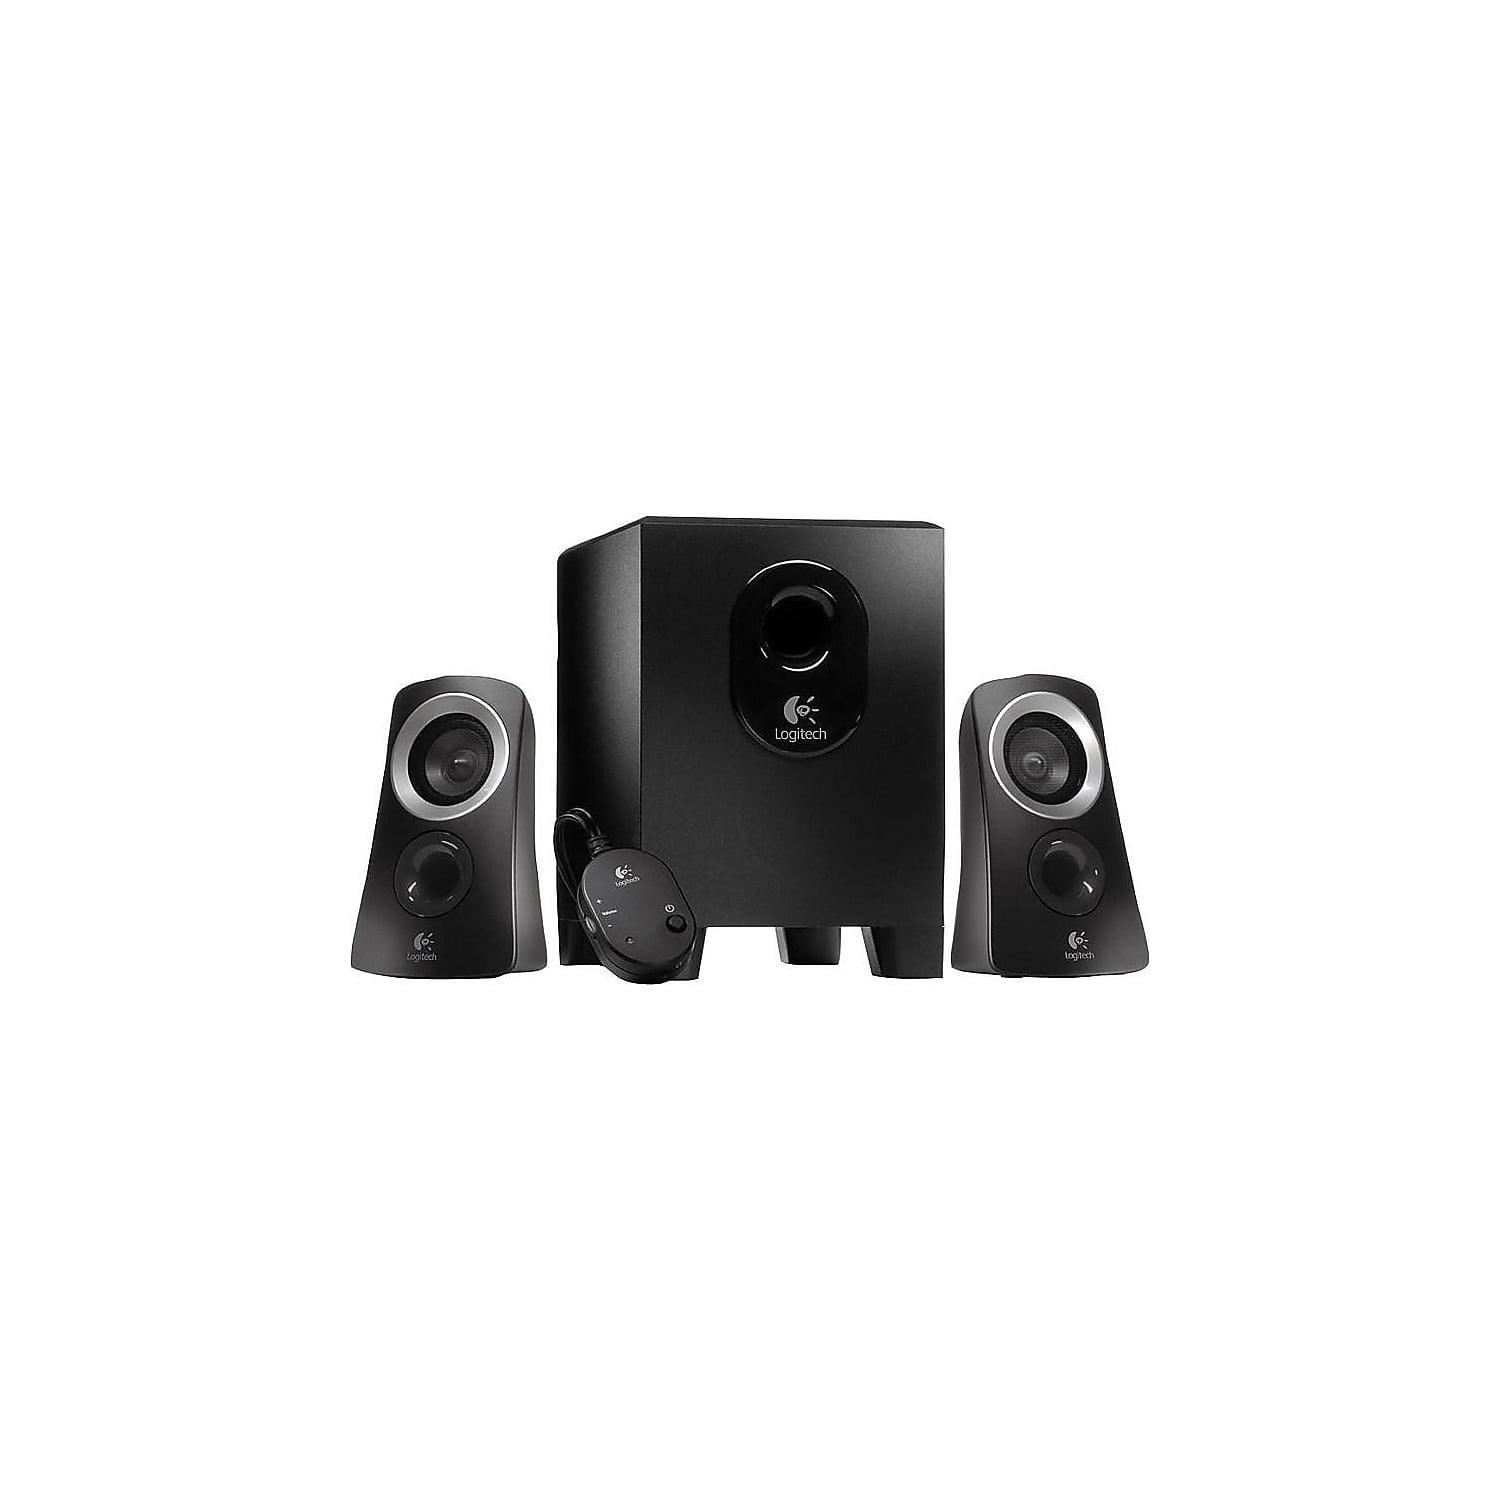  Logitech Z313 Speaker System Bundle K400 Plus Wireless Touch TV  Keyboard with Easy Media Control and Built-in Touchpad : Electronics